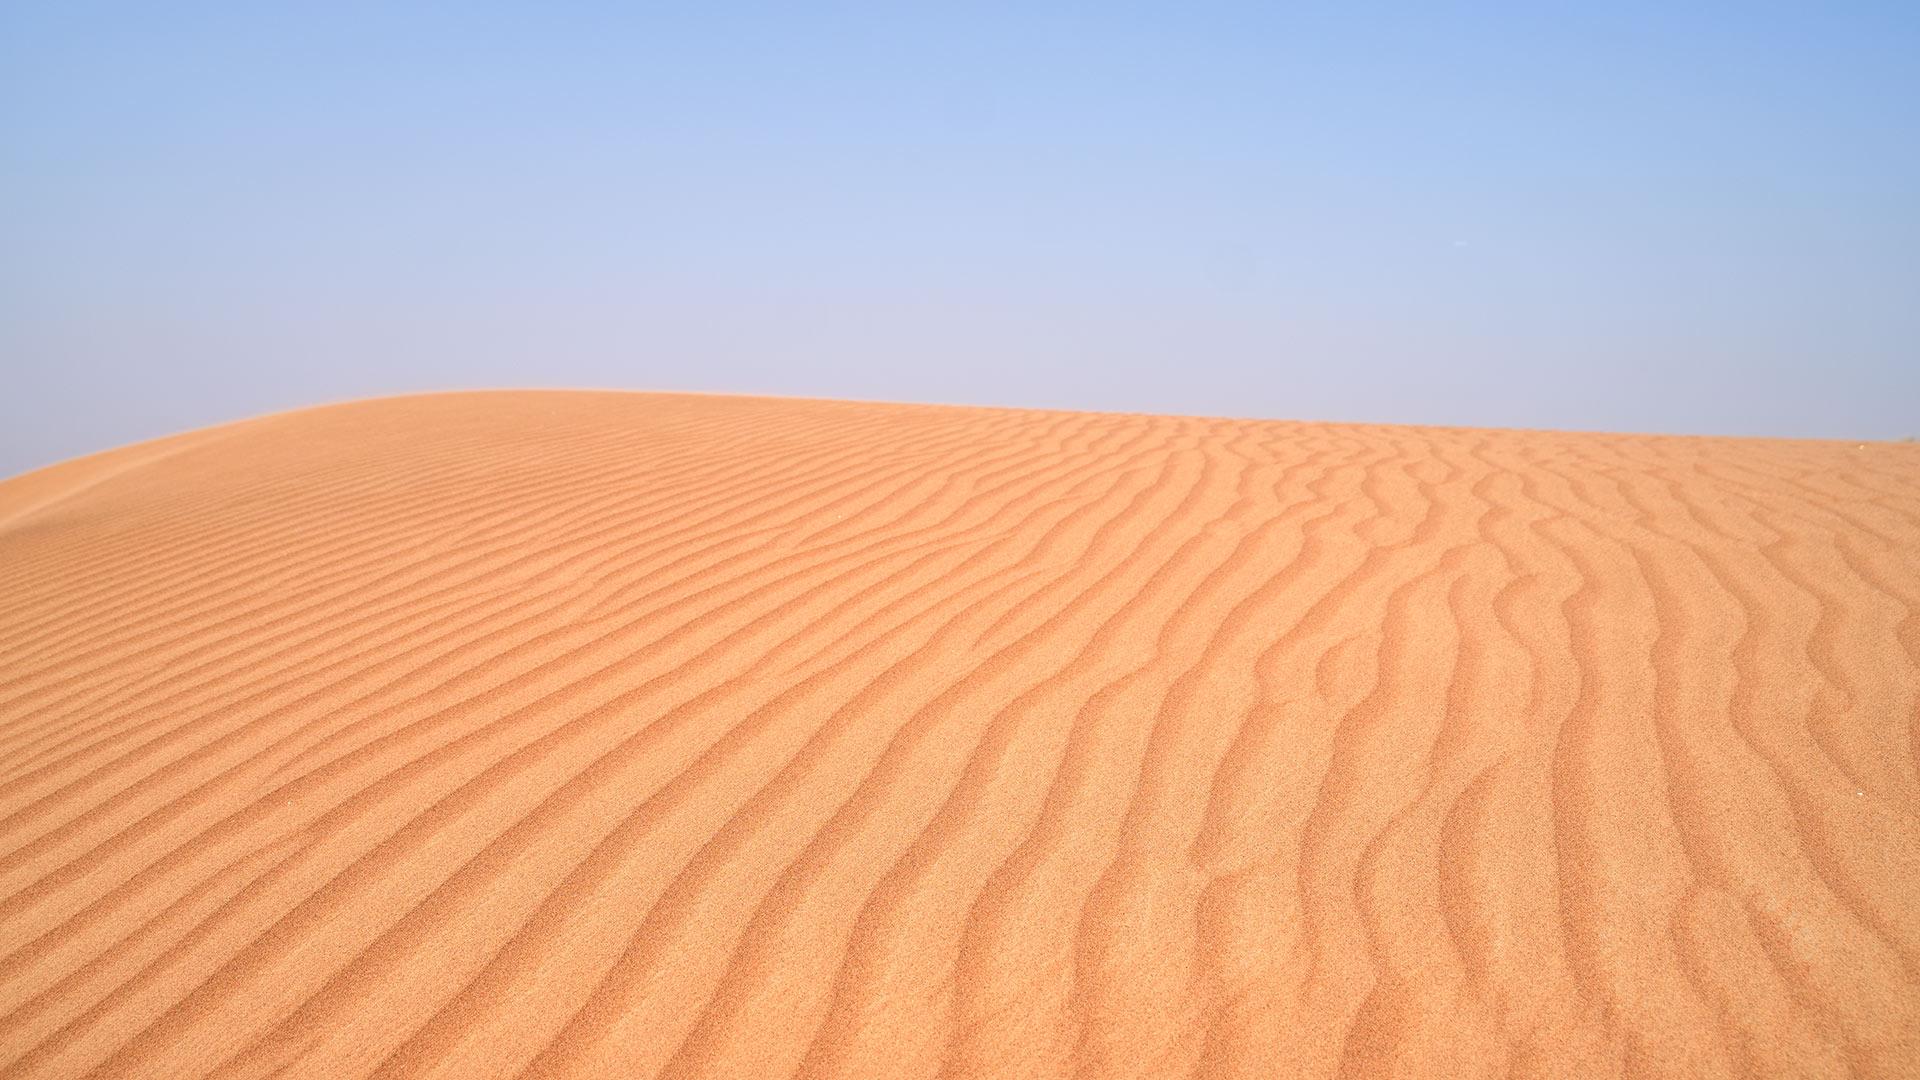 Image of a golden desert sand dune with a ripple effect pattern creating waves in the sand